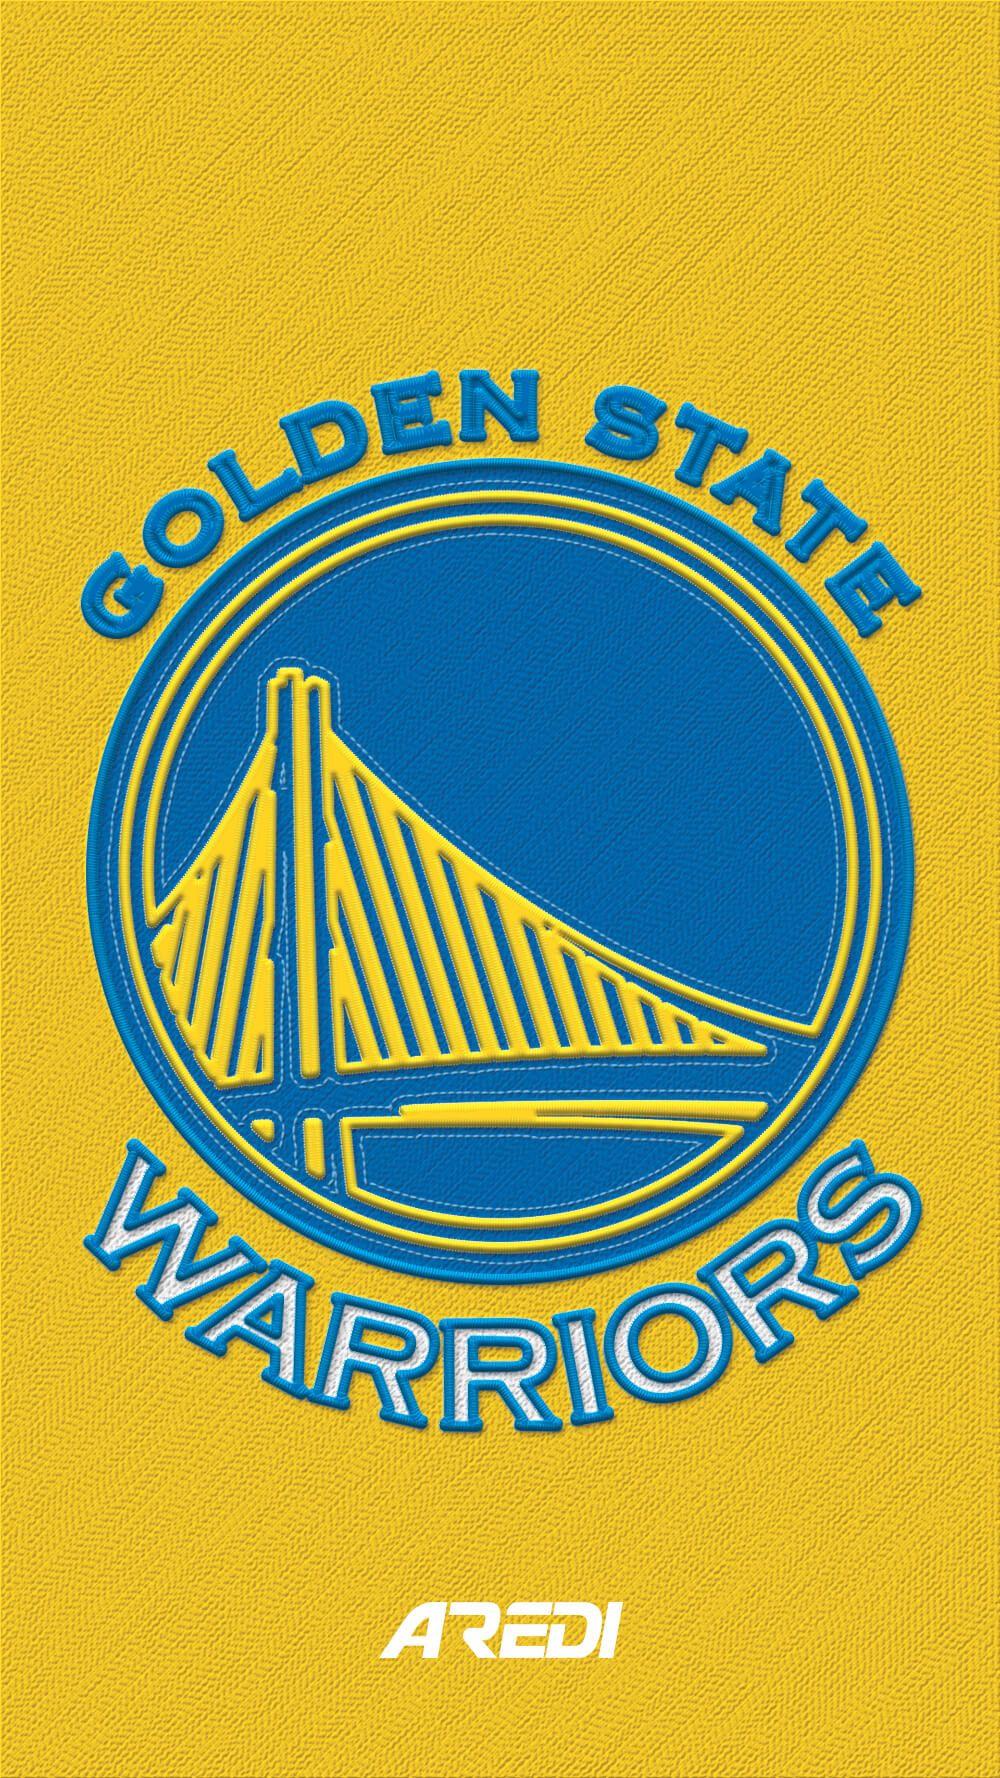 images, Golden State Warriors, logo, home logo, icon, Warriors